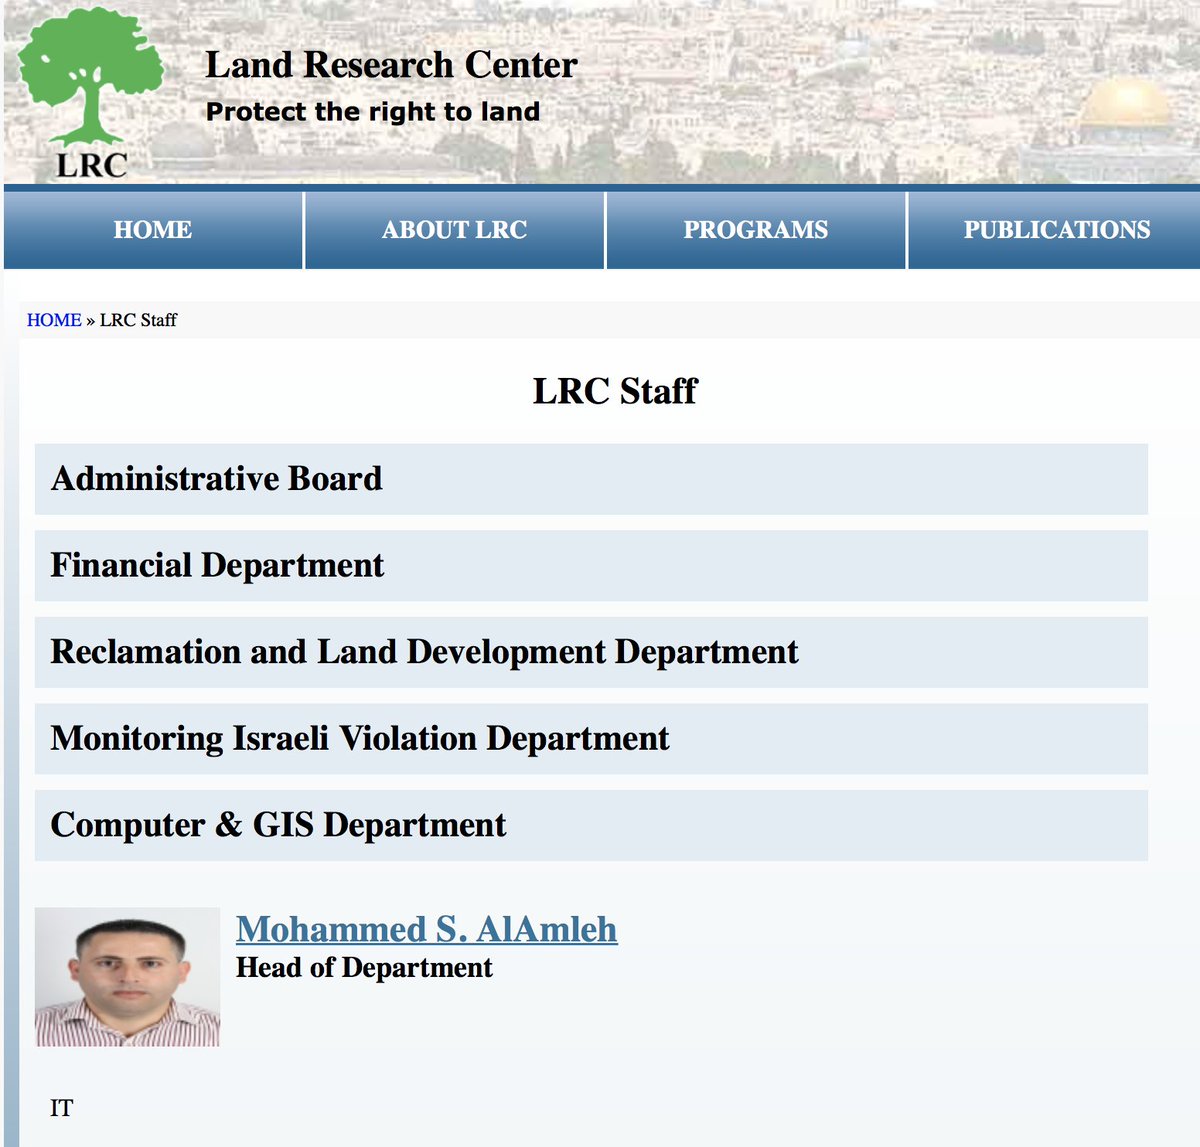 Report in Arabic available here:  http://lrcj.org/pdf/web/viewer.html?file=Jer_Demo_2000_2017_ARB_S.pdfWho is LRC? Can't find any proper information or translation by any notable sources for this report but I did find their website and the only two employees with the same last name.  http://www.lrcj.org/team.html-  0 traffic.